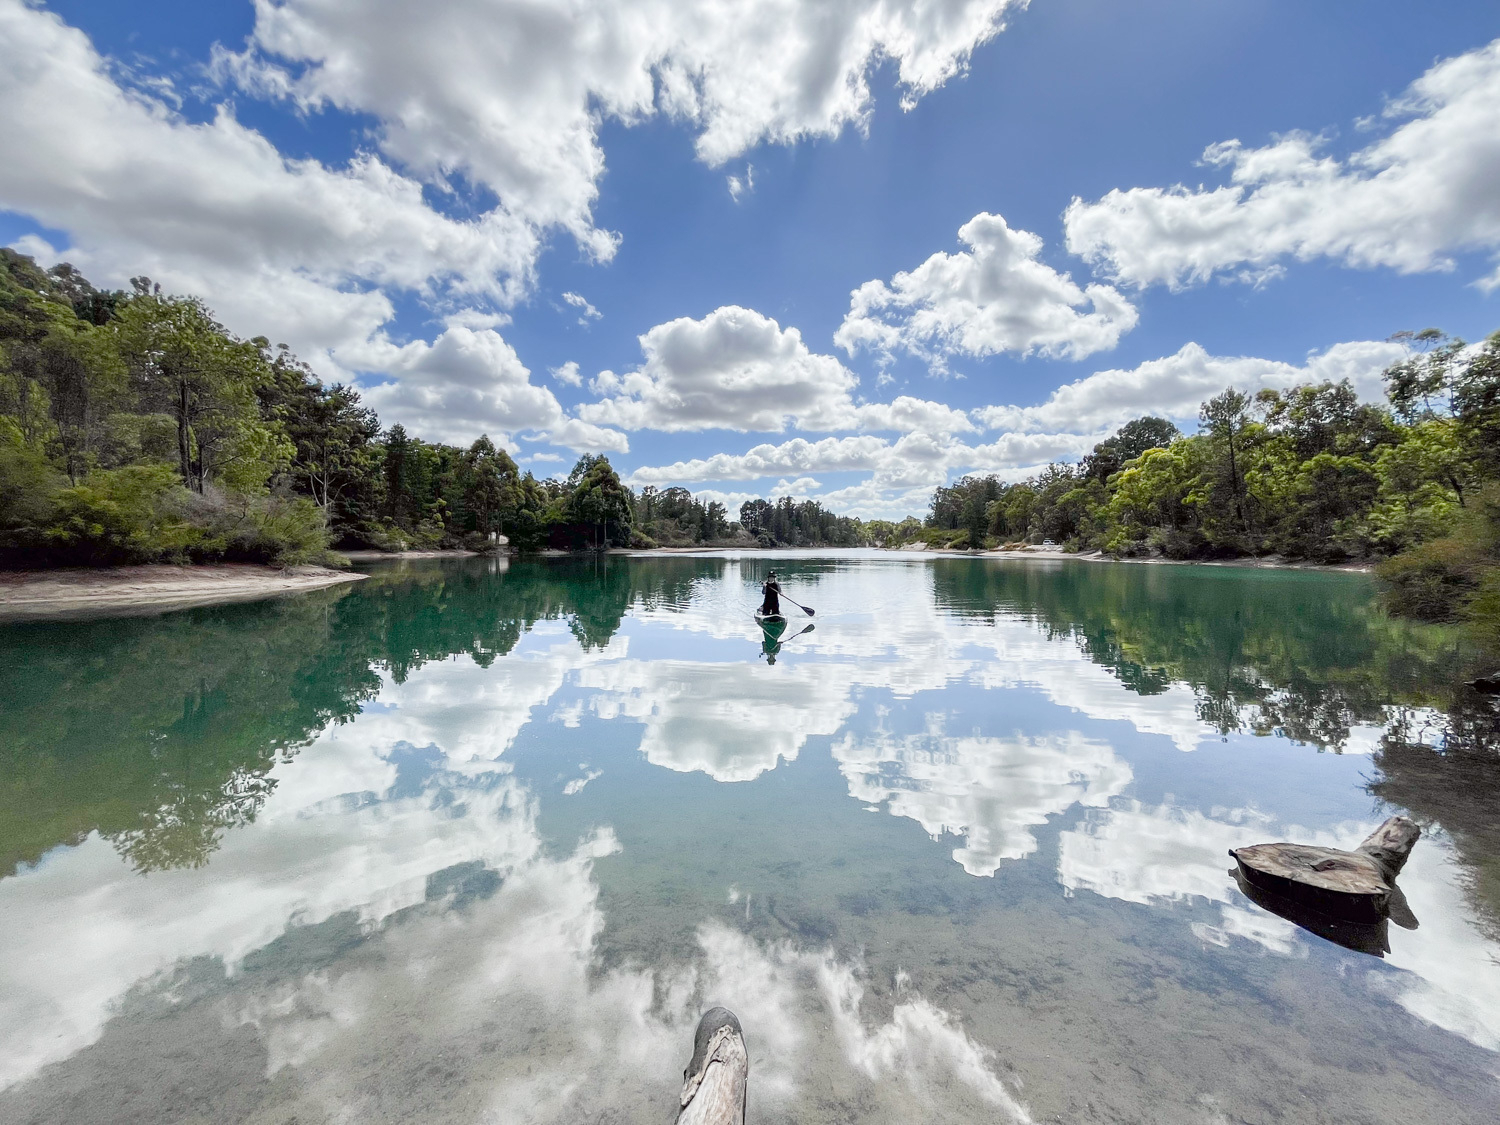 A person paddleboarding on a calm lake with clear reflections of clouds and surrounding forest - image by author